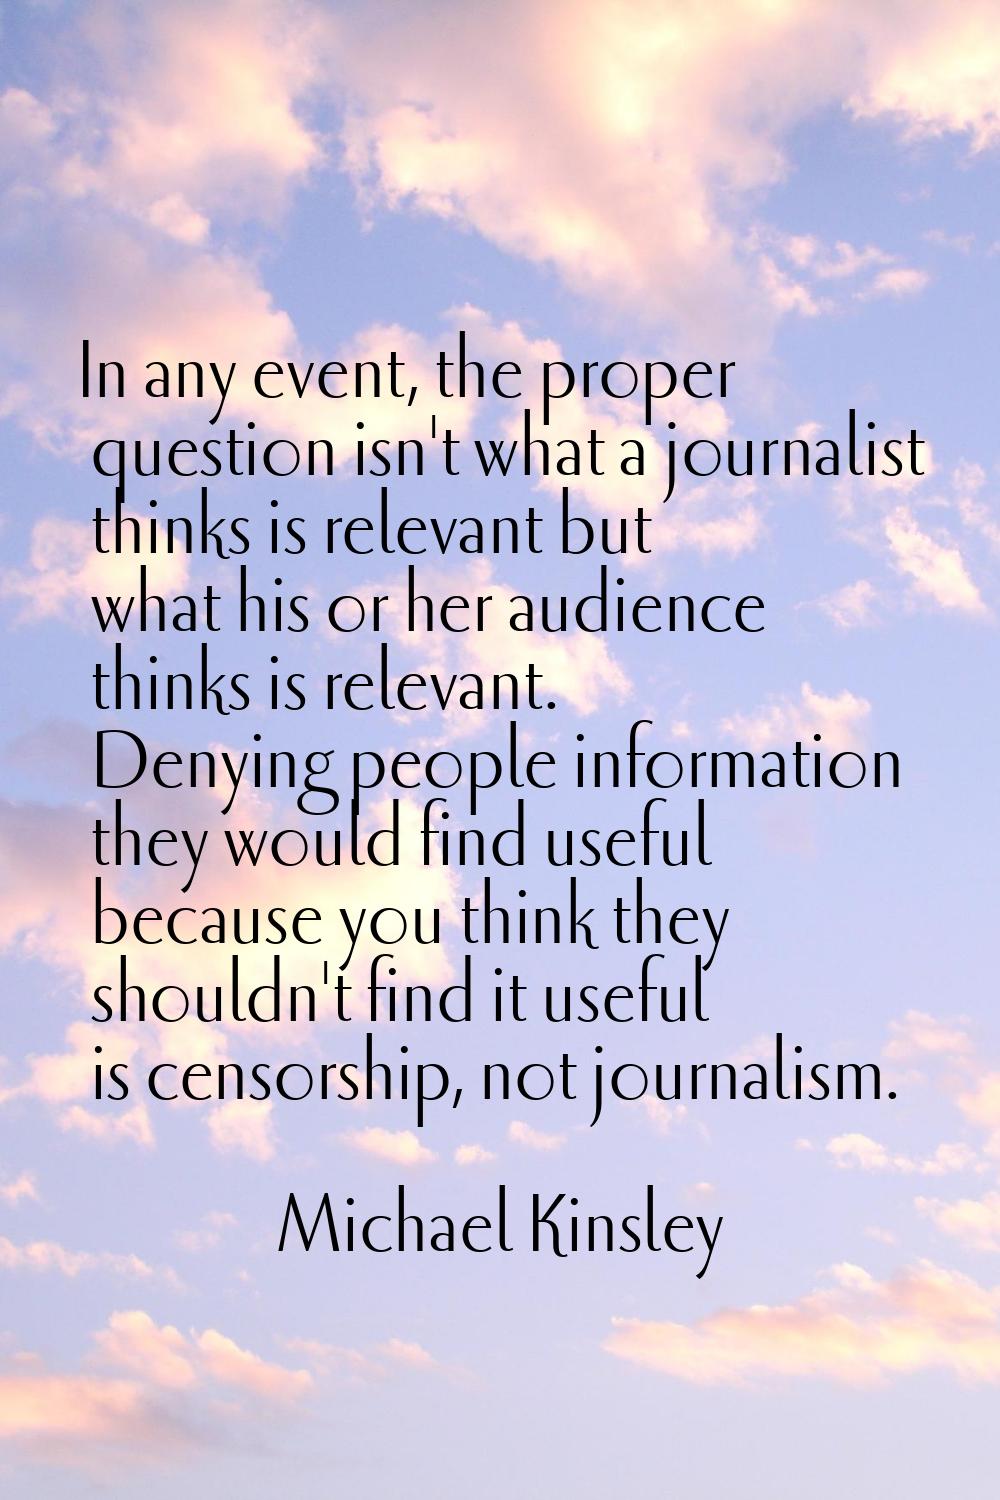 In any event, the proper question isn't what a journalist thinks is relevant but what his or her au